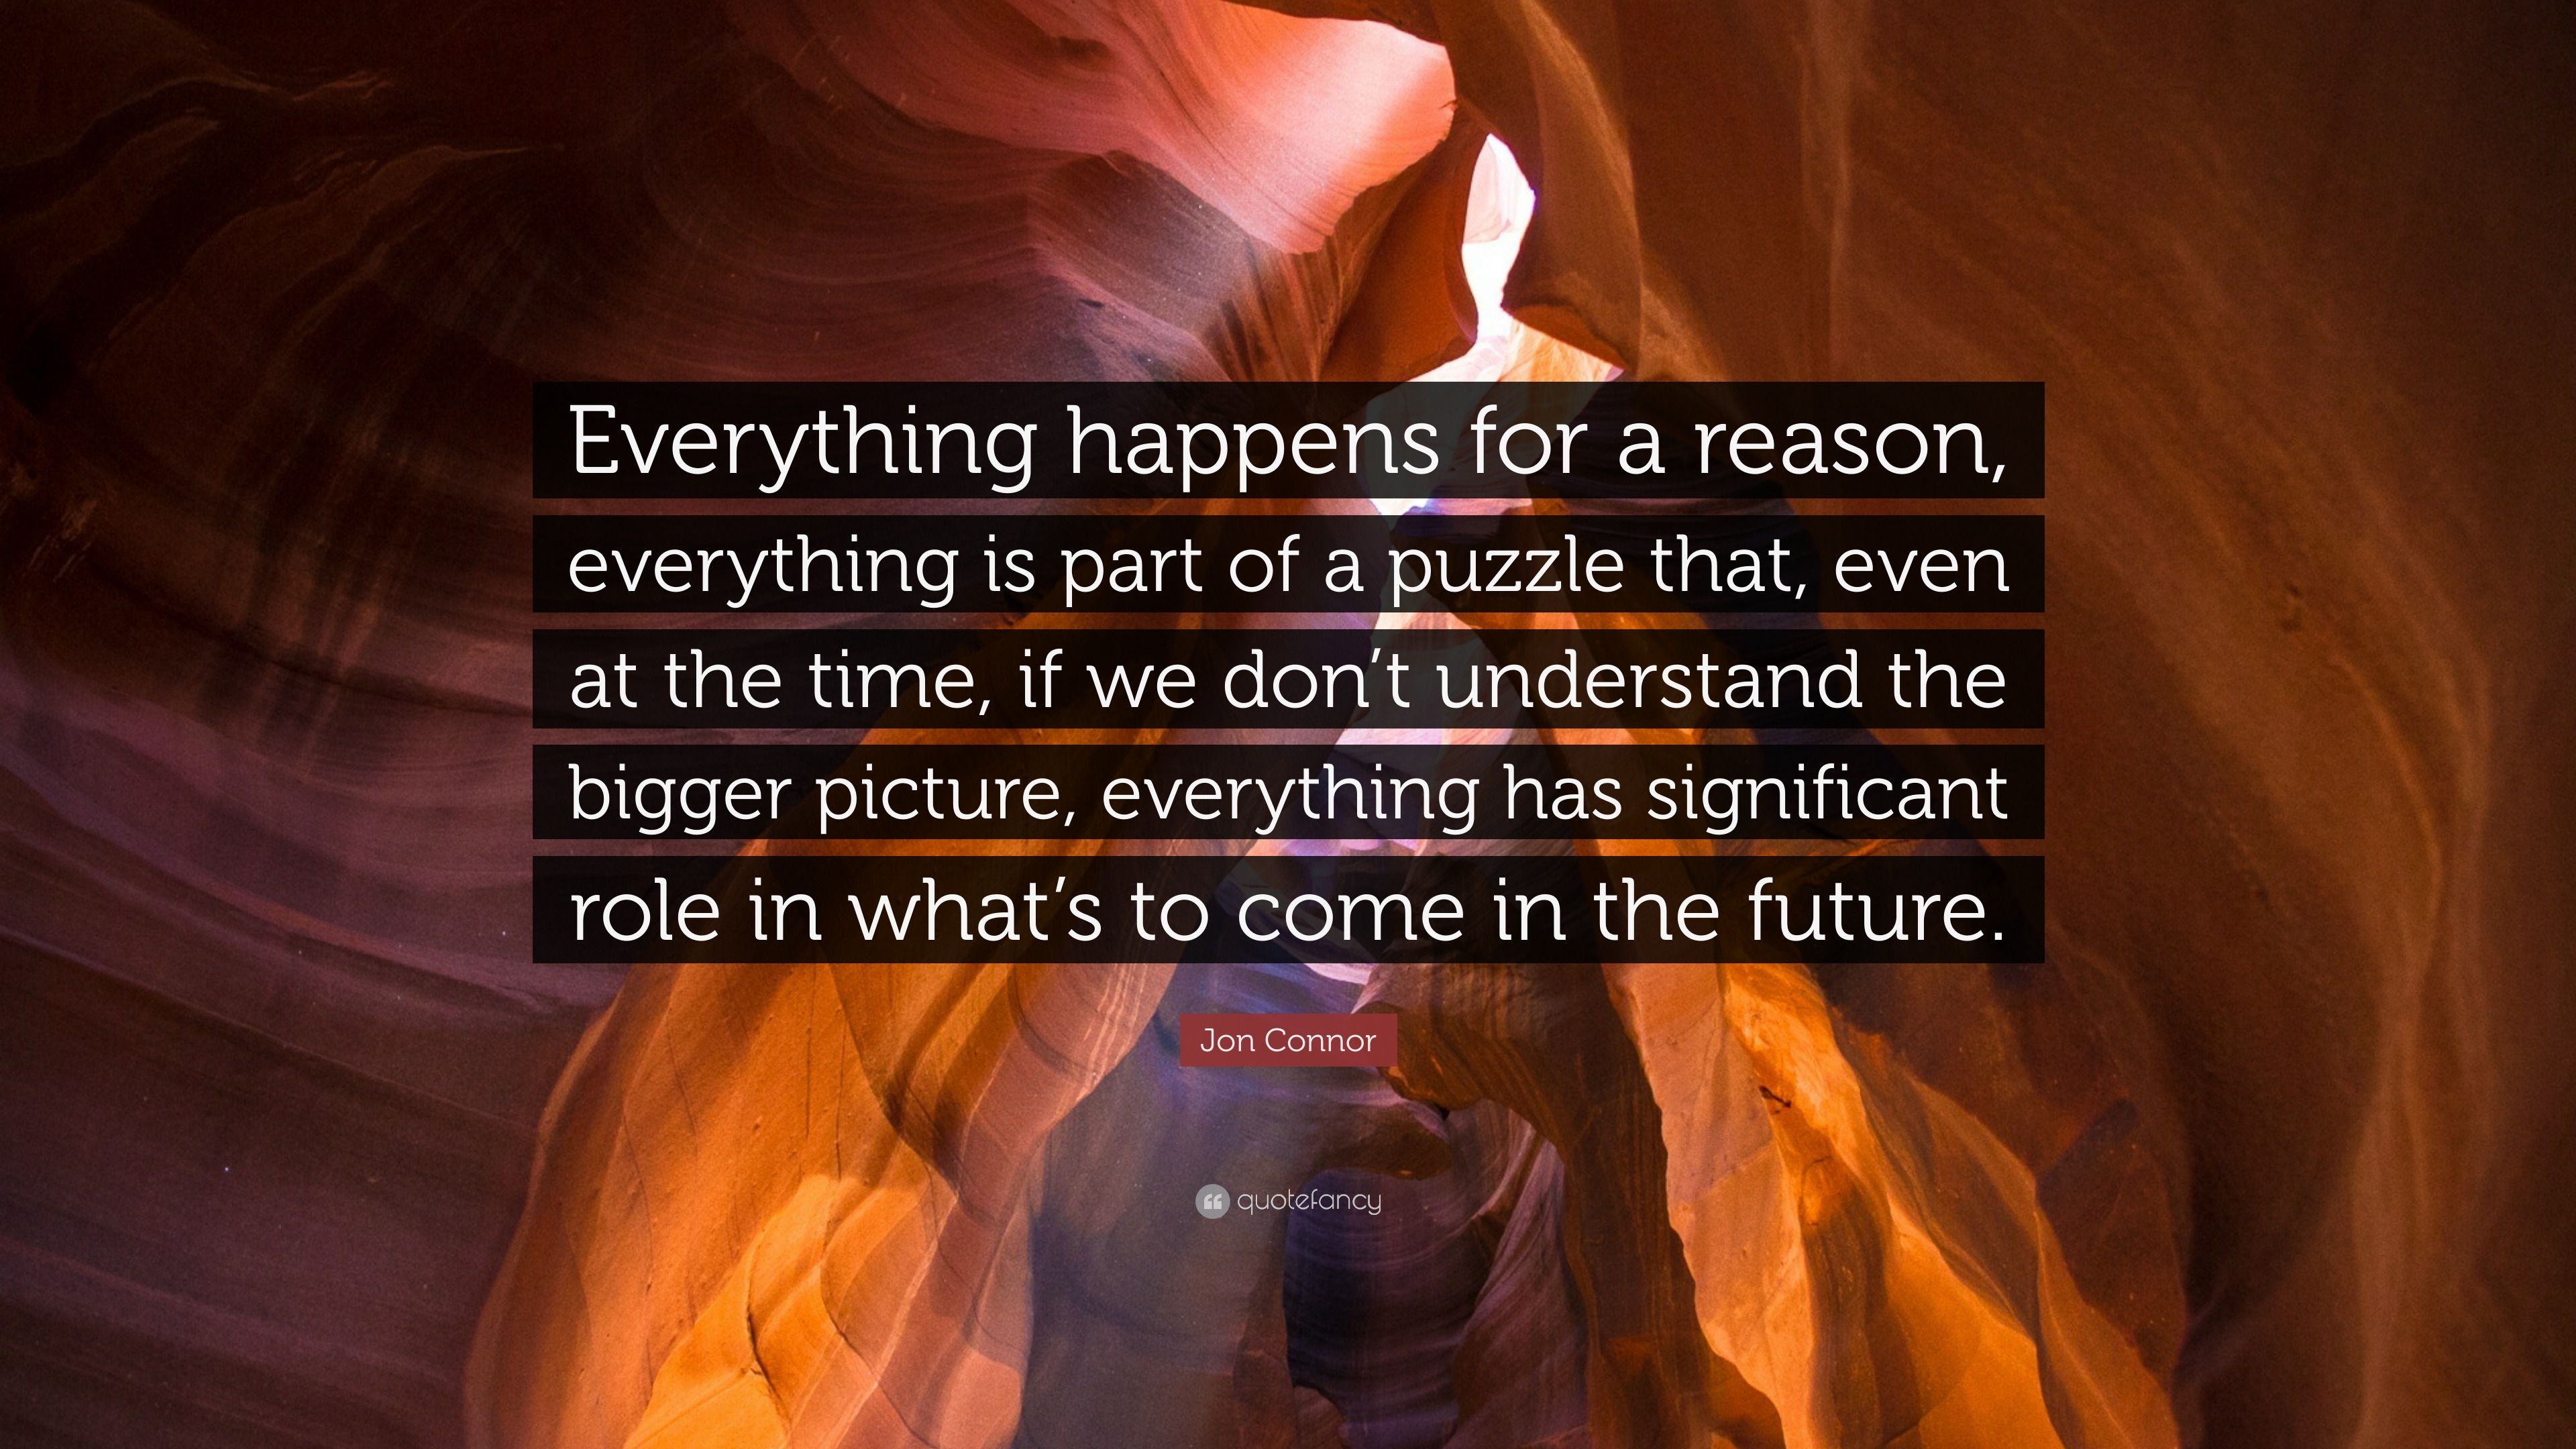 Jon Connor Quote “everything Happens For A Reason Everything Is Part Of A Puzzle That Even At